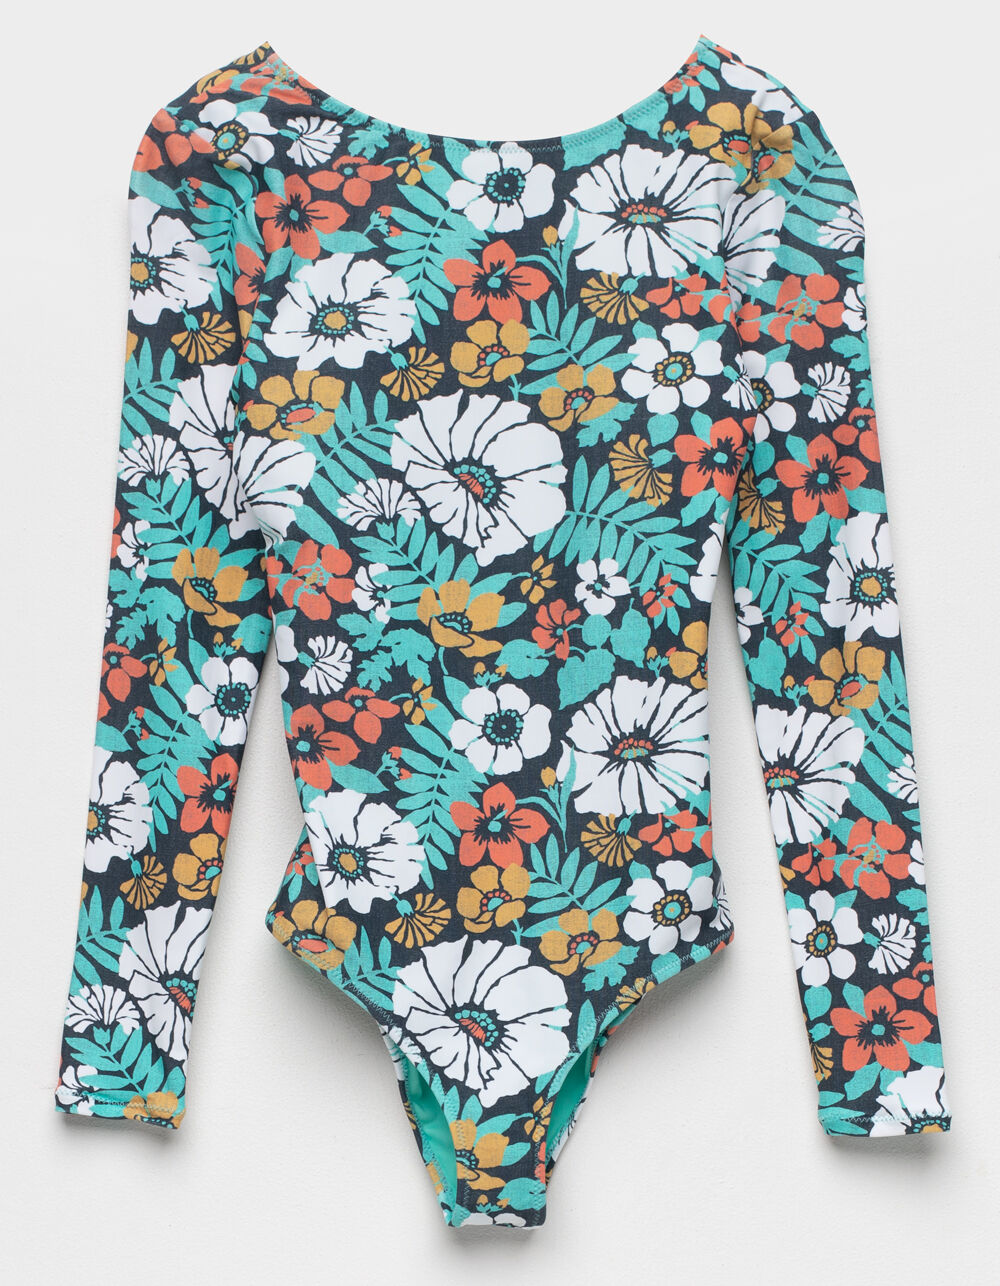 O'NEILL Sola Girls One Piece Surf Suit - MULTI | Tillys